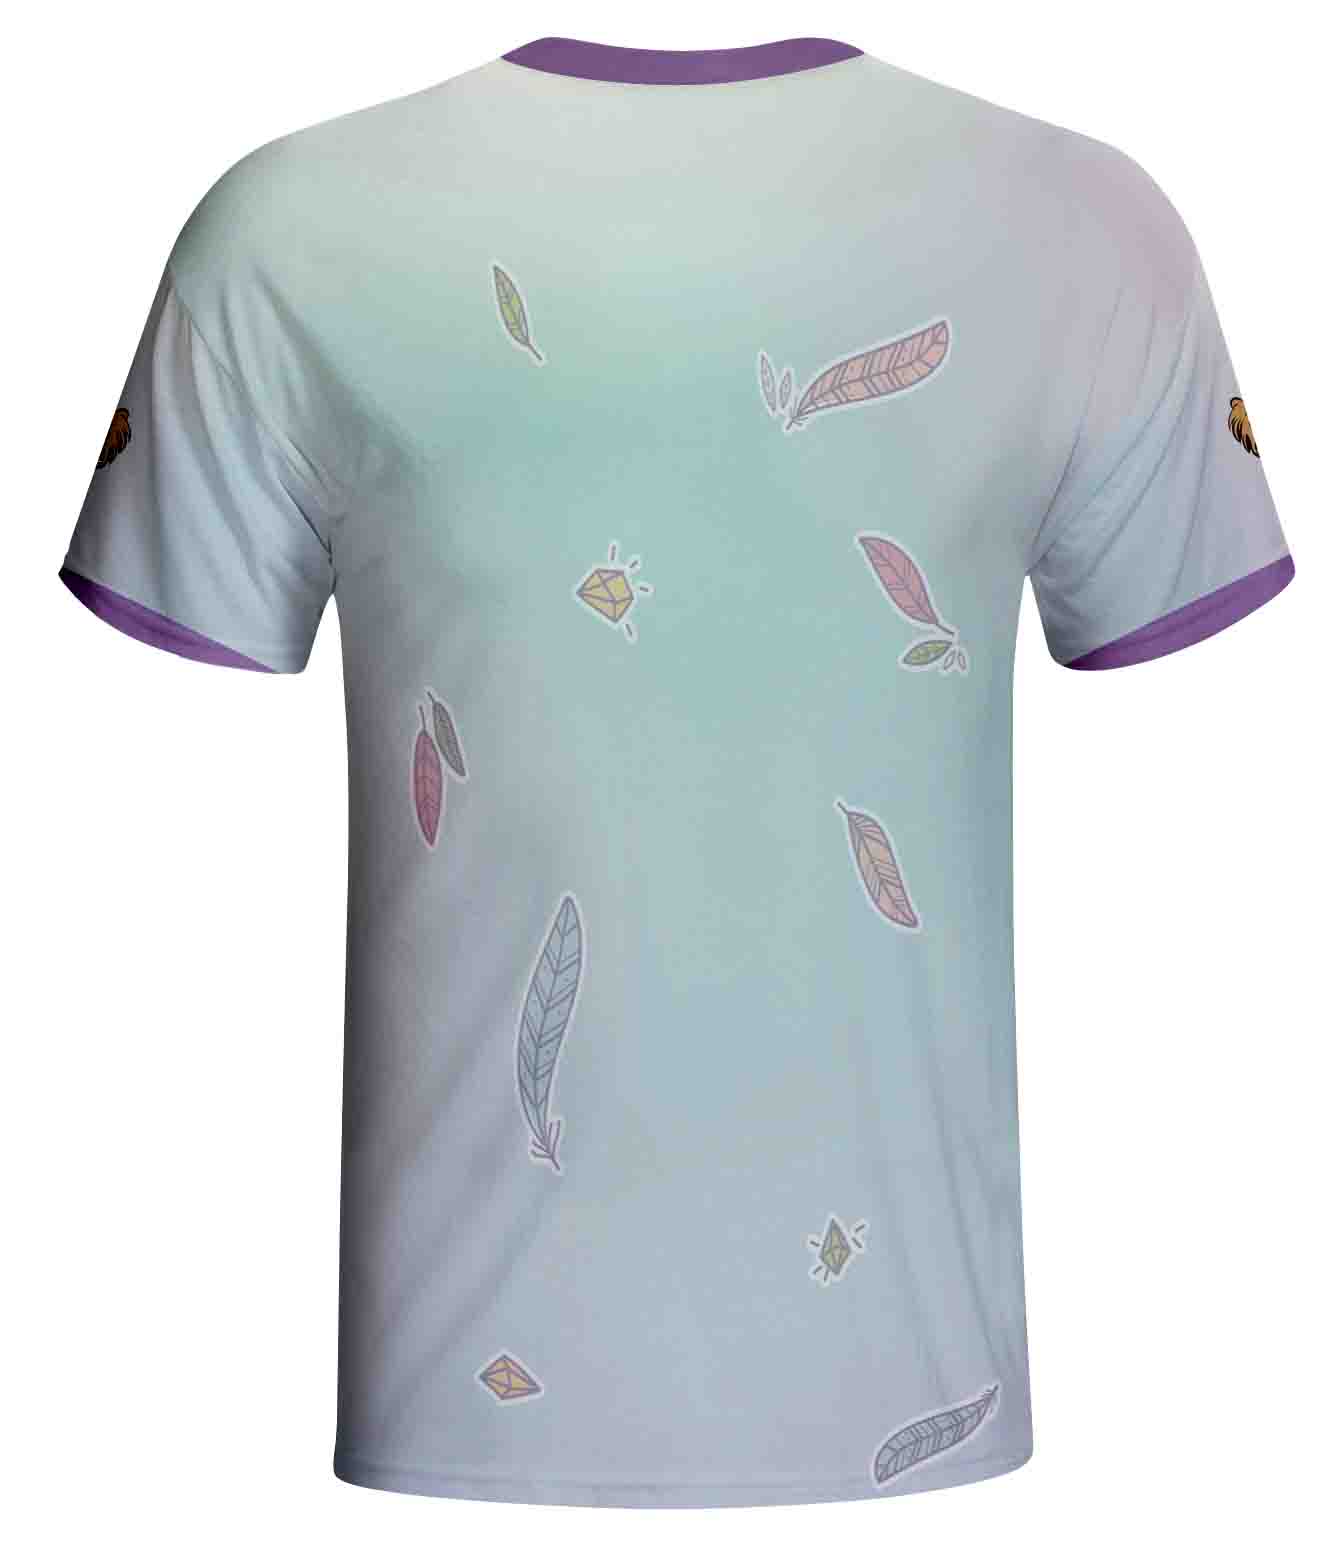 Sublimated Vimost Shirt Customized Gym Wear